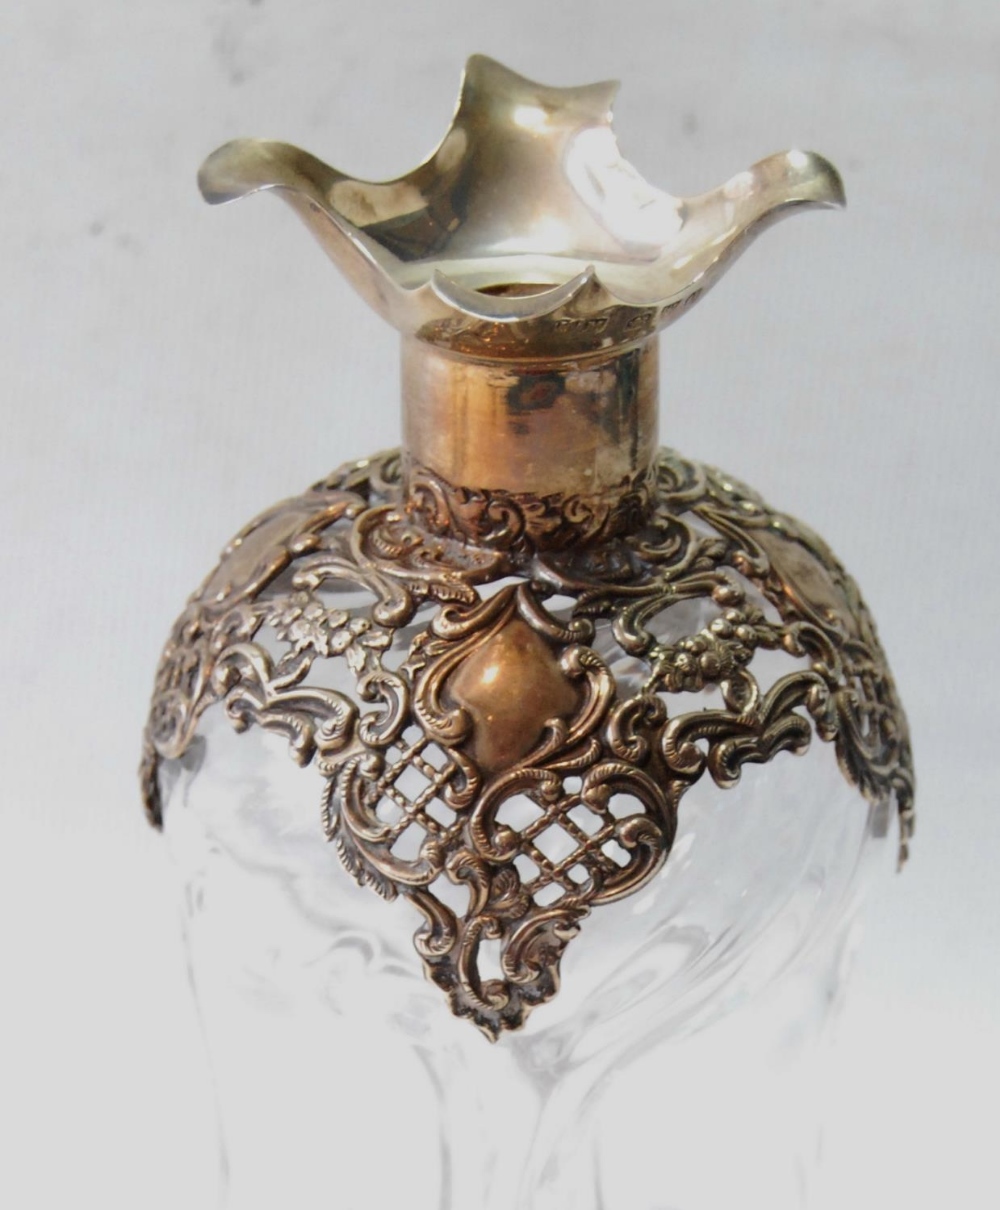 Glass 'glug glug' decanter by Henry Mathews, Birmingham 1897, with pierced and embossed silver - Image 2 of 3